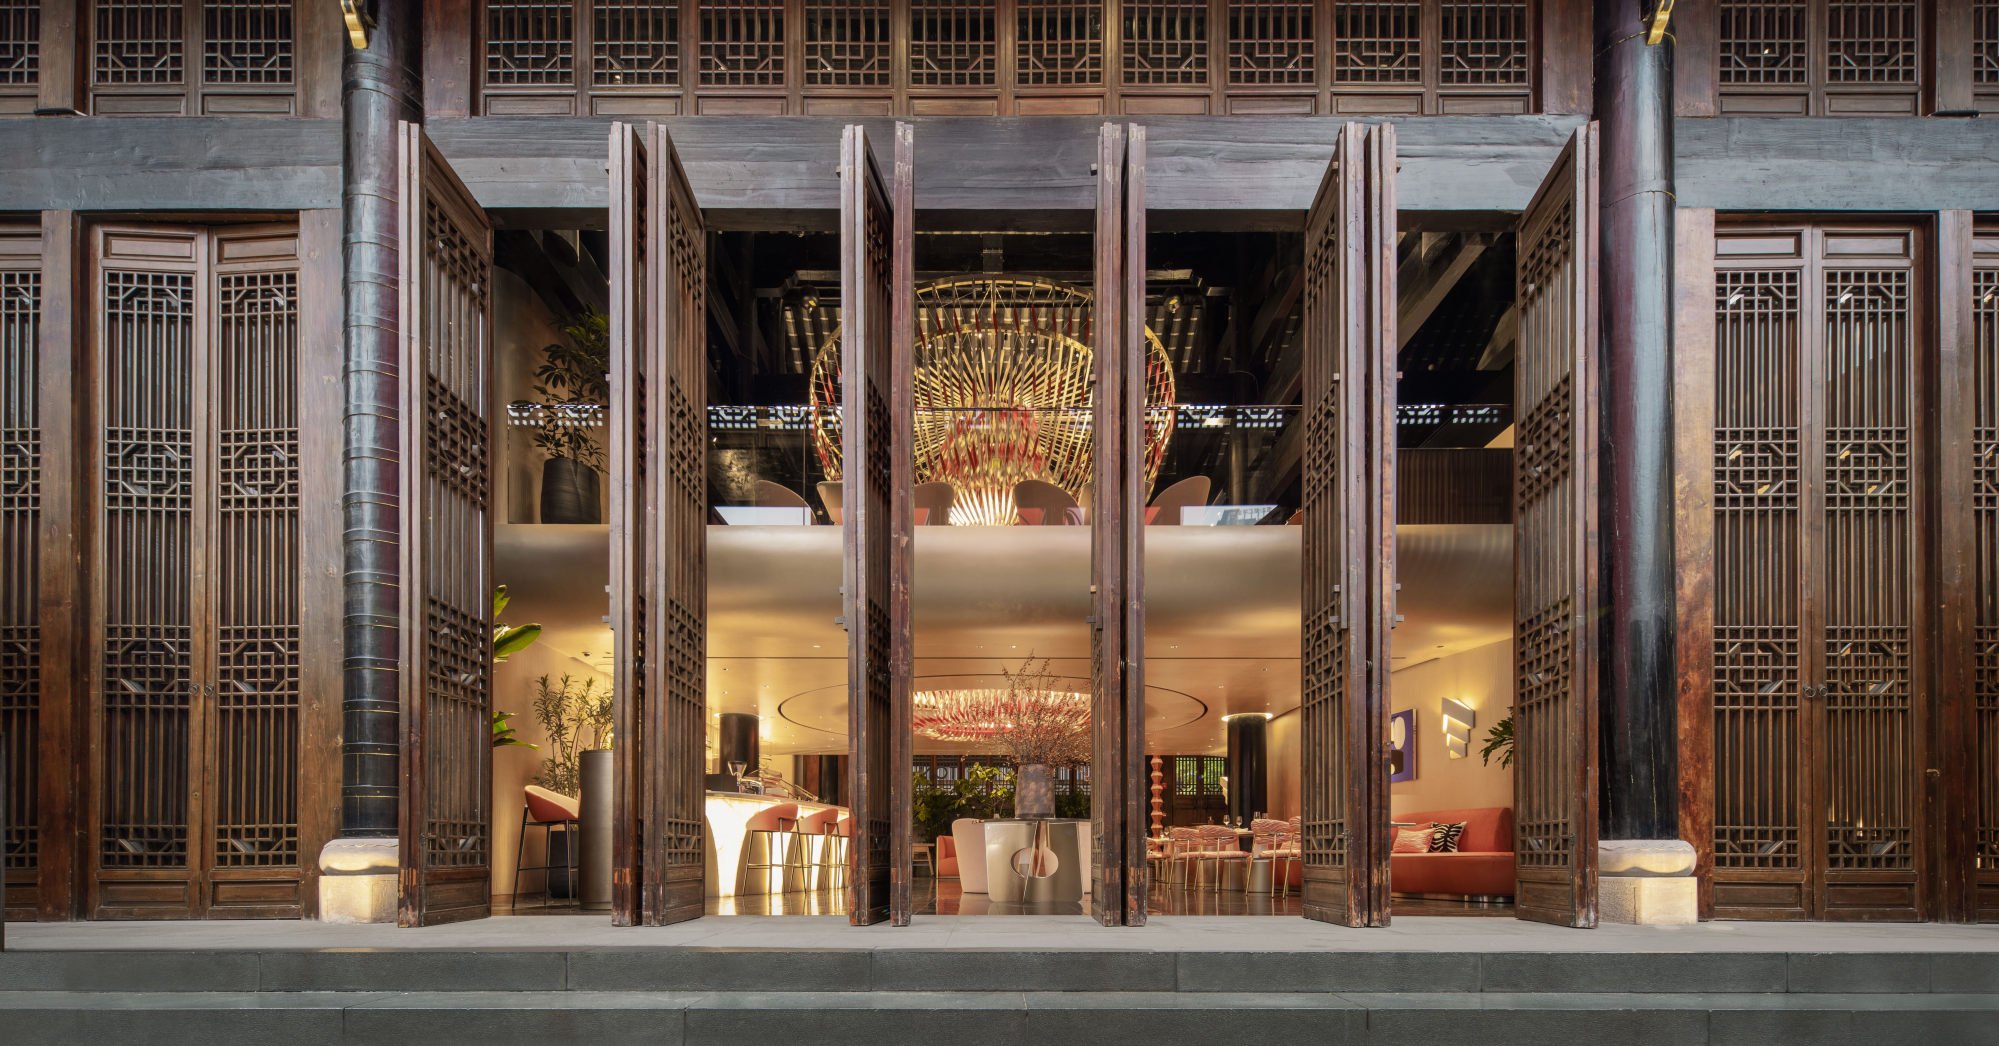 Louis Vuitton debuts first China restaurant in Chengdu as luxury